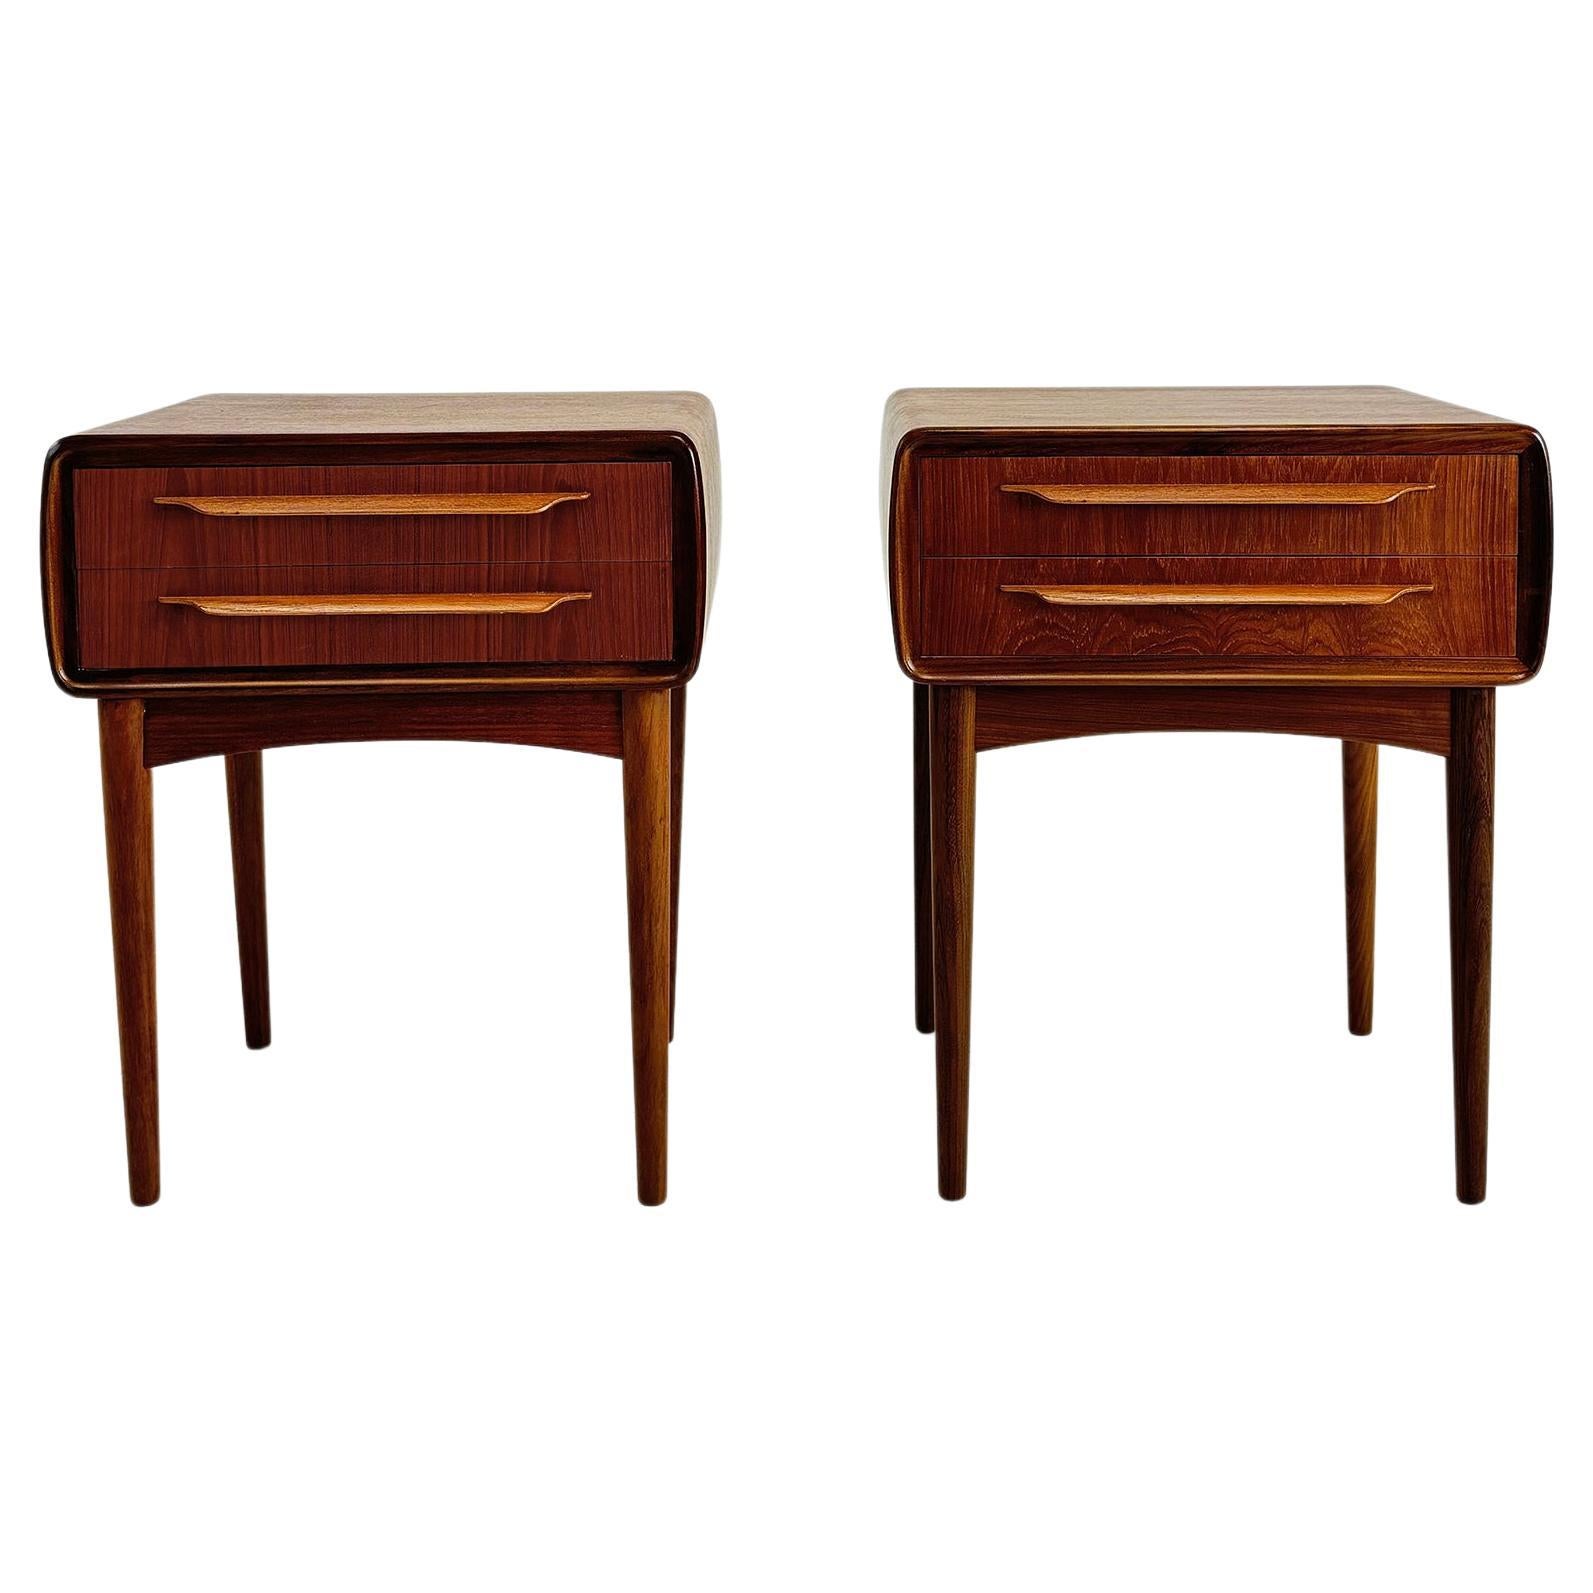 A Pair of Teak Night Stands by Johaness Andersen c.1960's For Sale